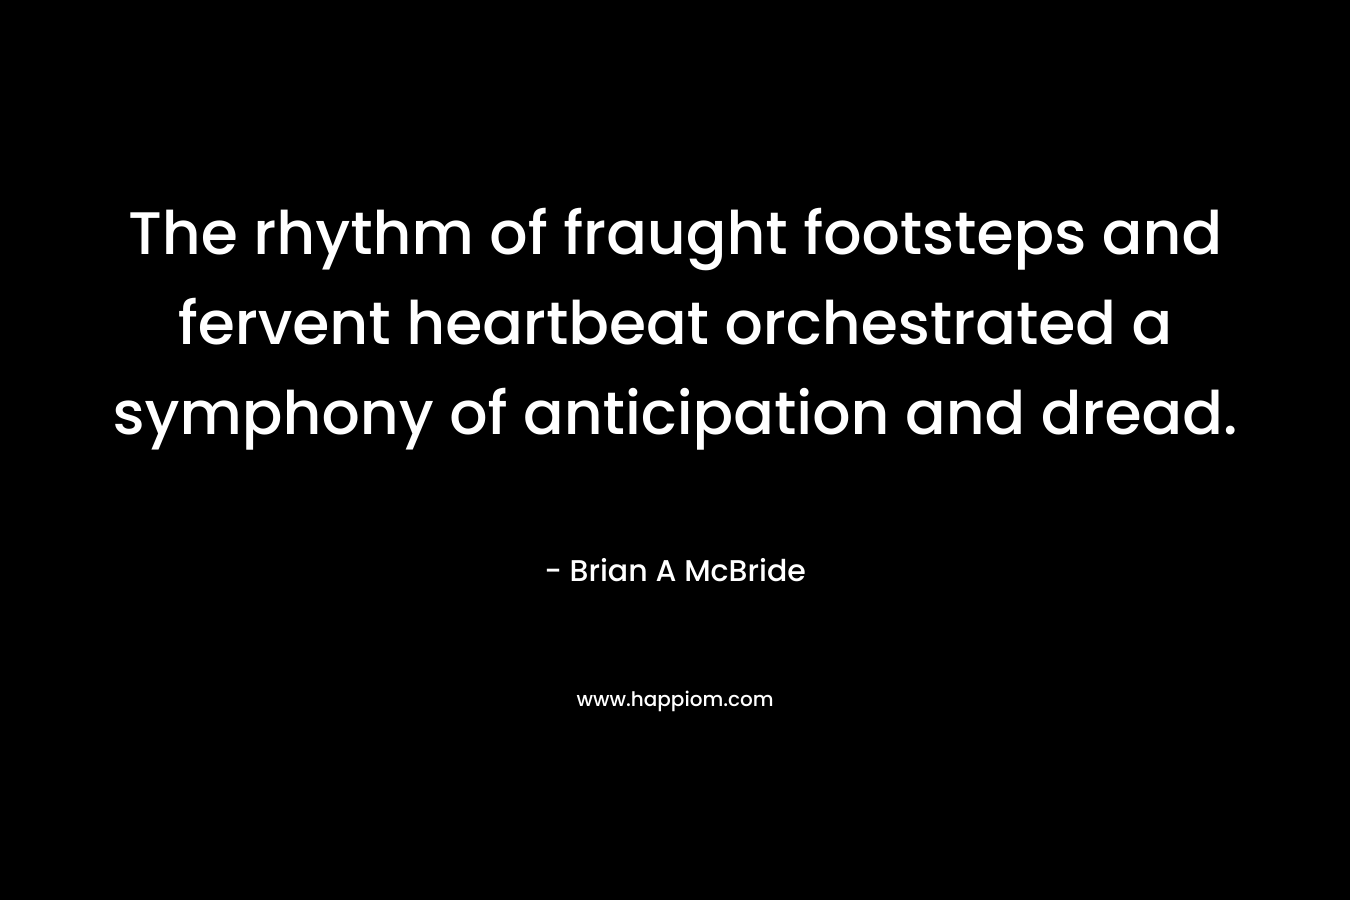 The rhythm of fraught footsteps and fervent heartbeat orchestrated a symphony of anticipation and dread. – Brian A McBride